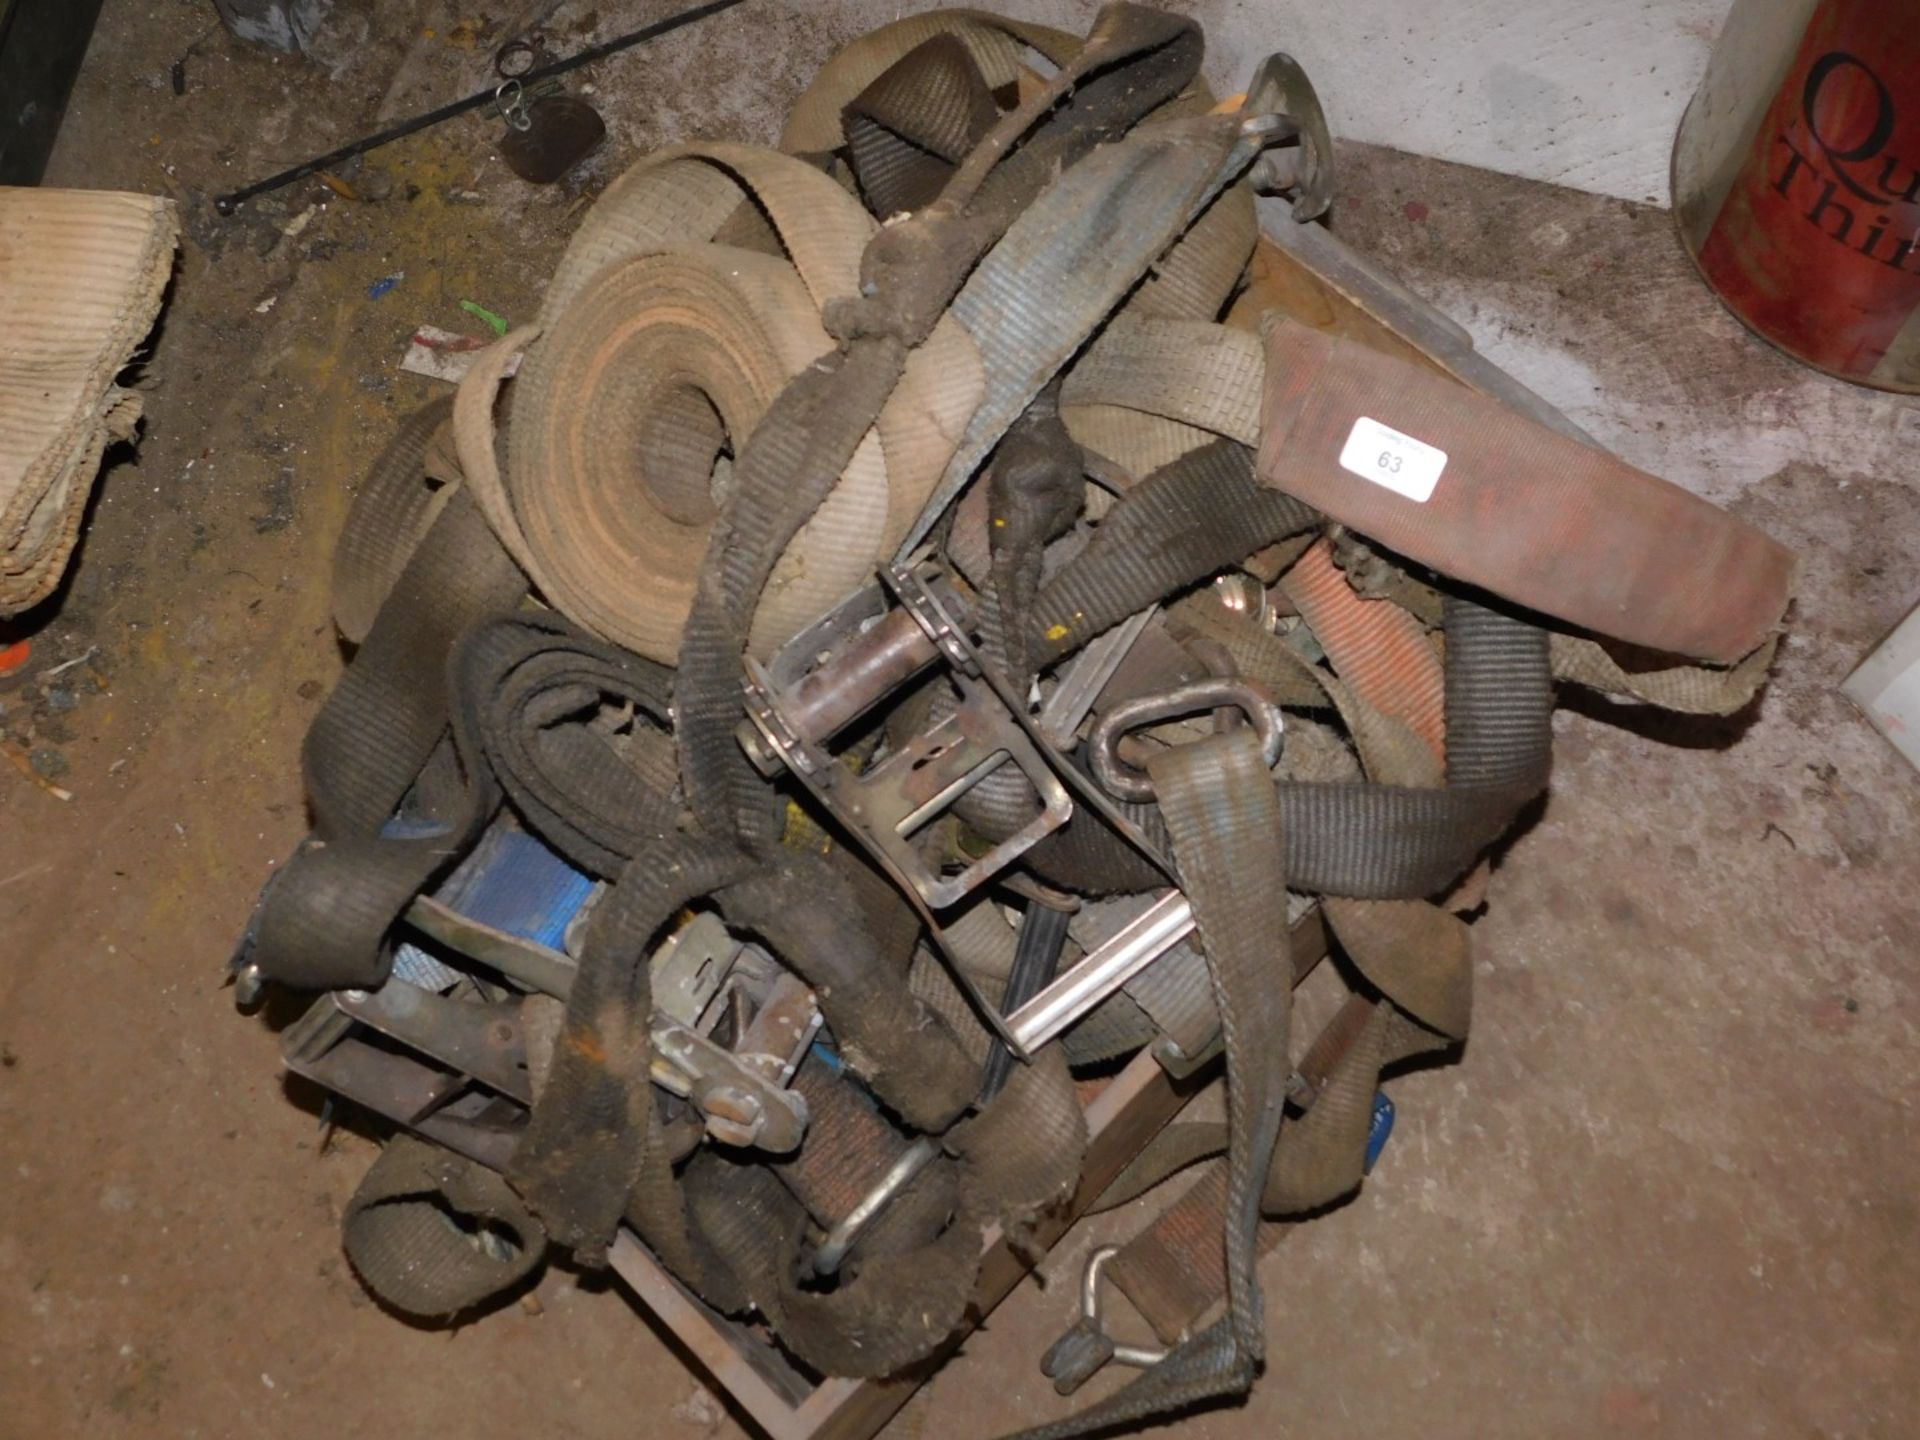 A quantity of heavy duty ratchets and straps.